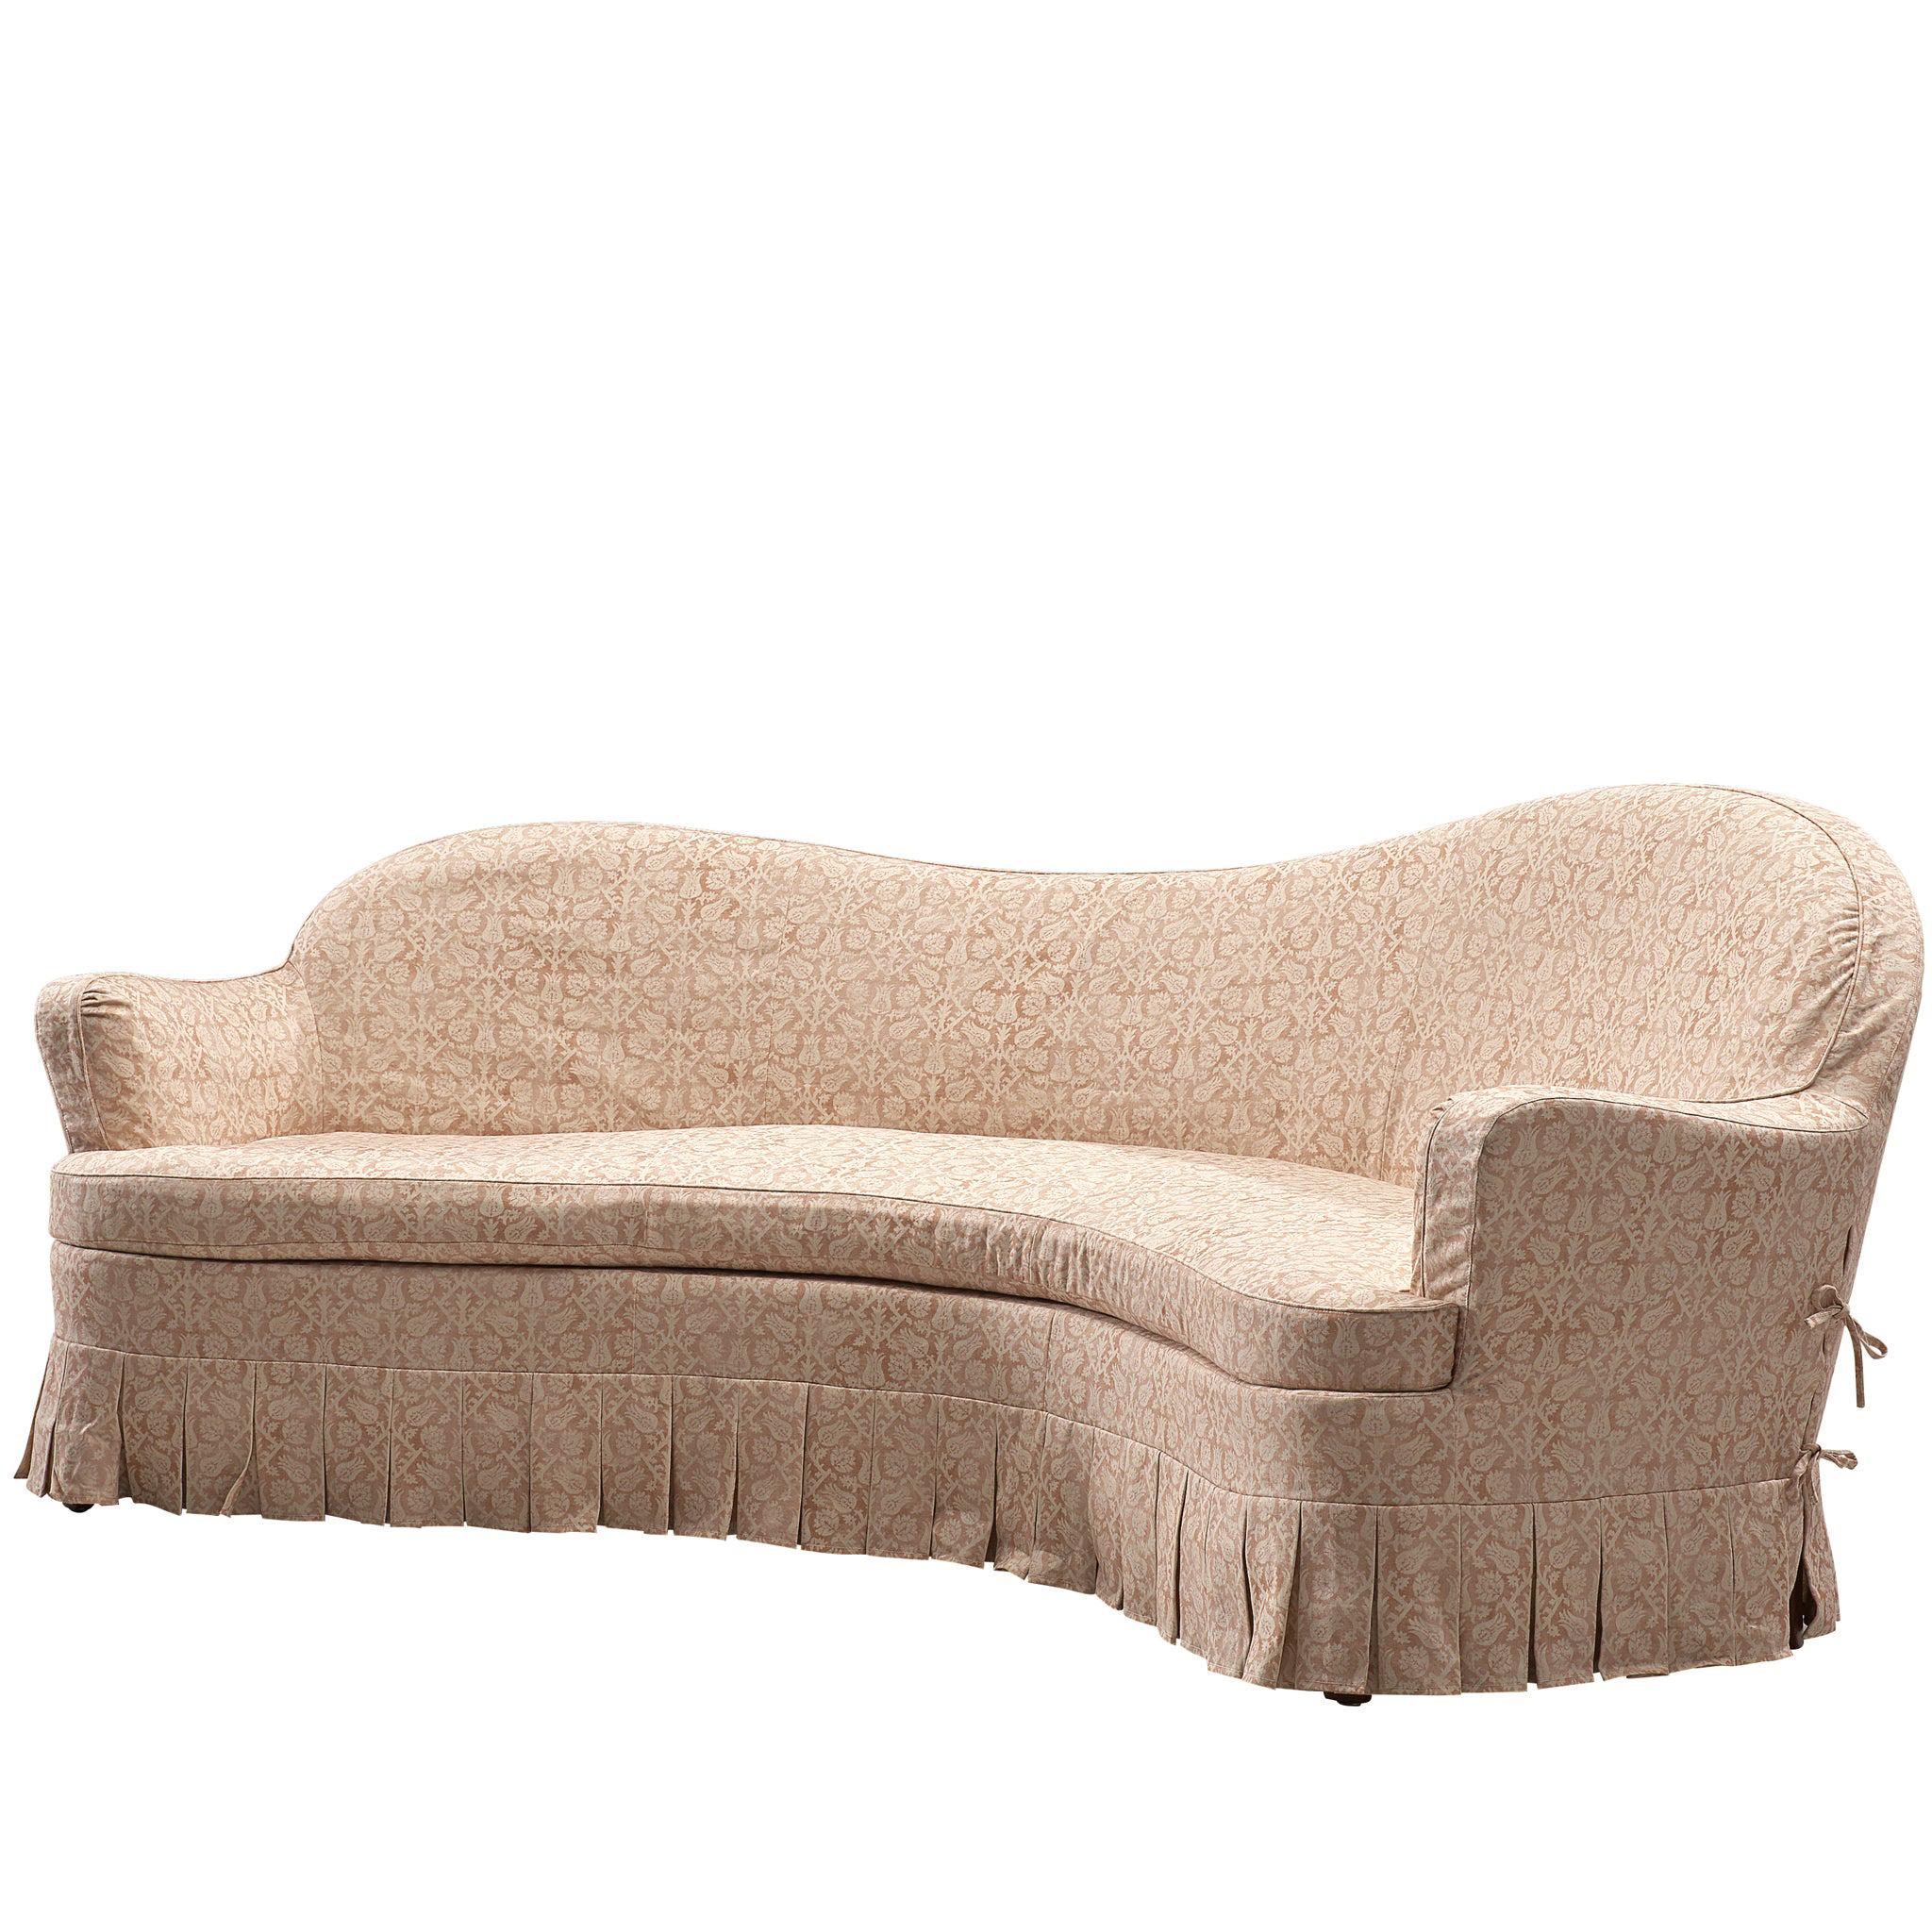 French Curved Sofa in ZAK+FOX ‘Fantasma’ Collection 2020 Upholstery